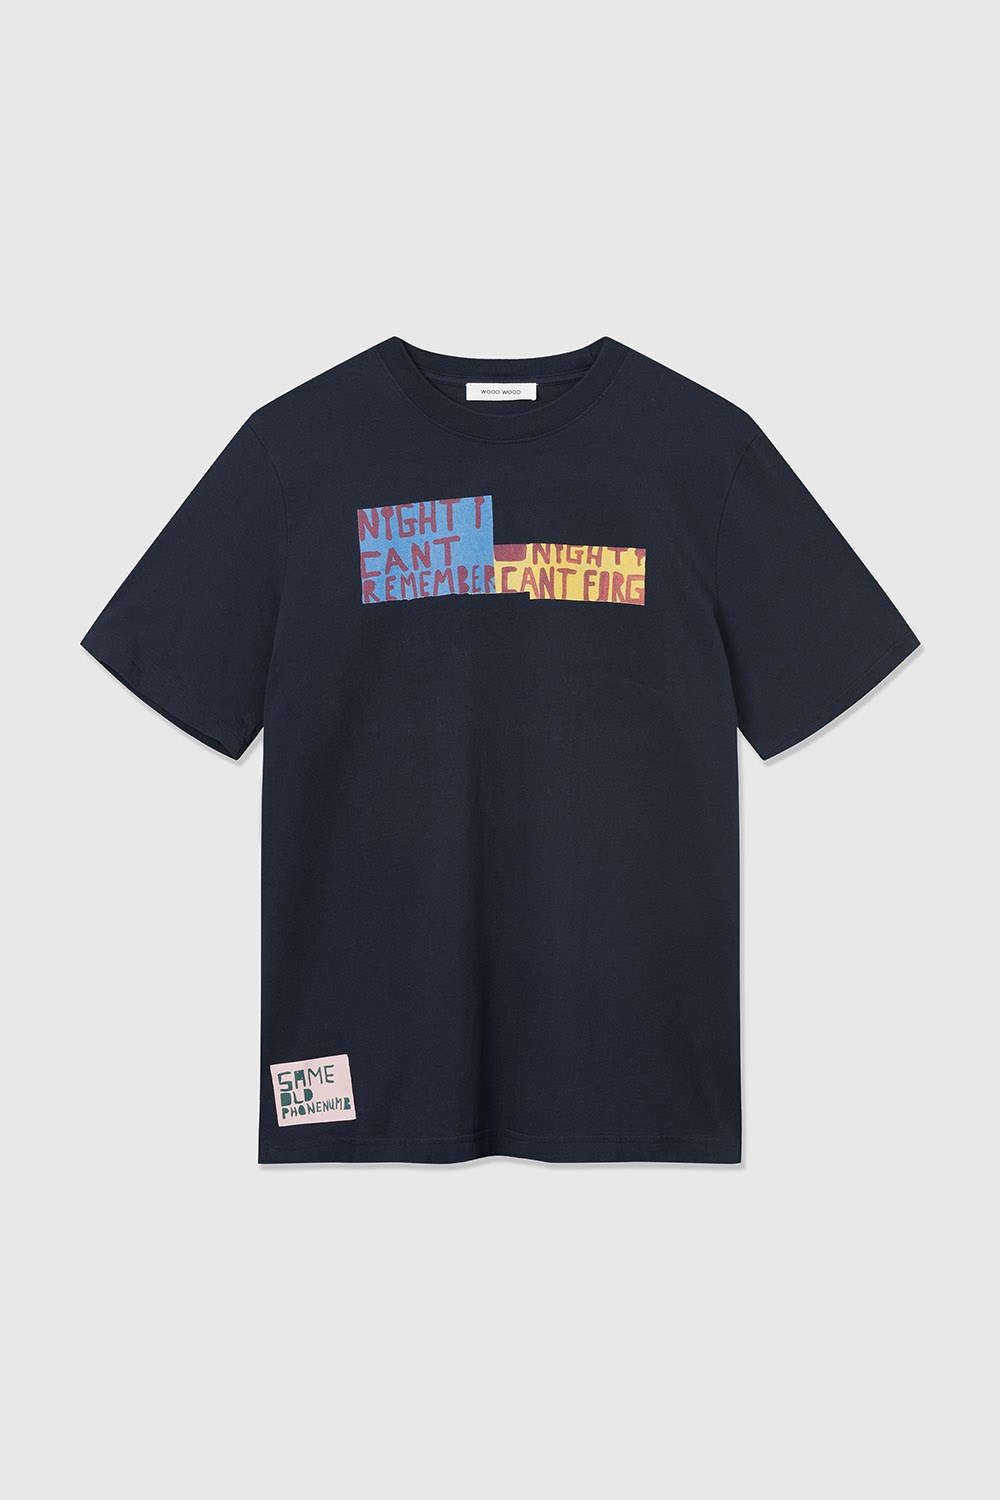 Wood Wood Bobby collage T-shirt Navy | WoodWood.com